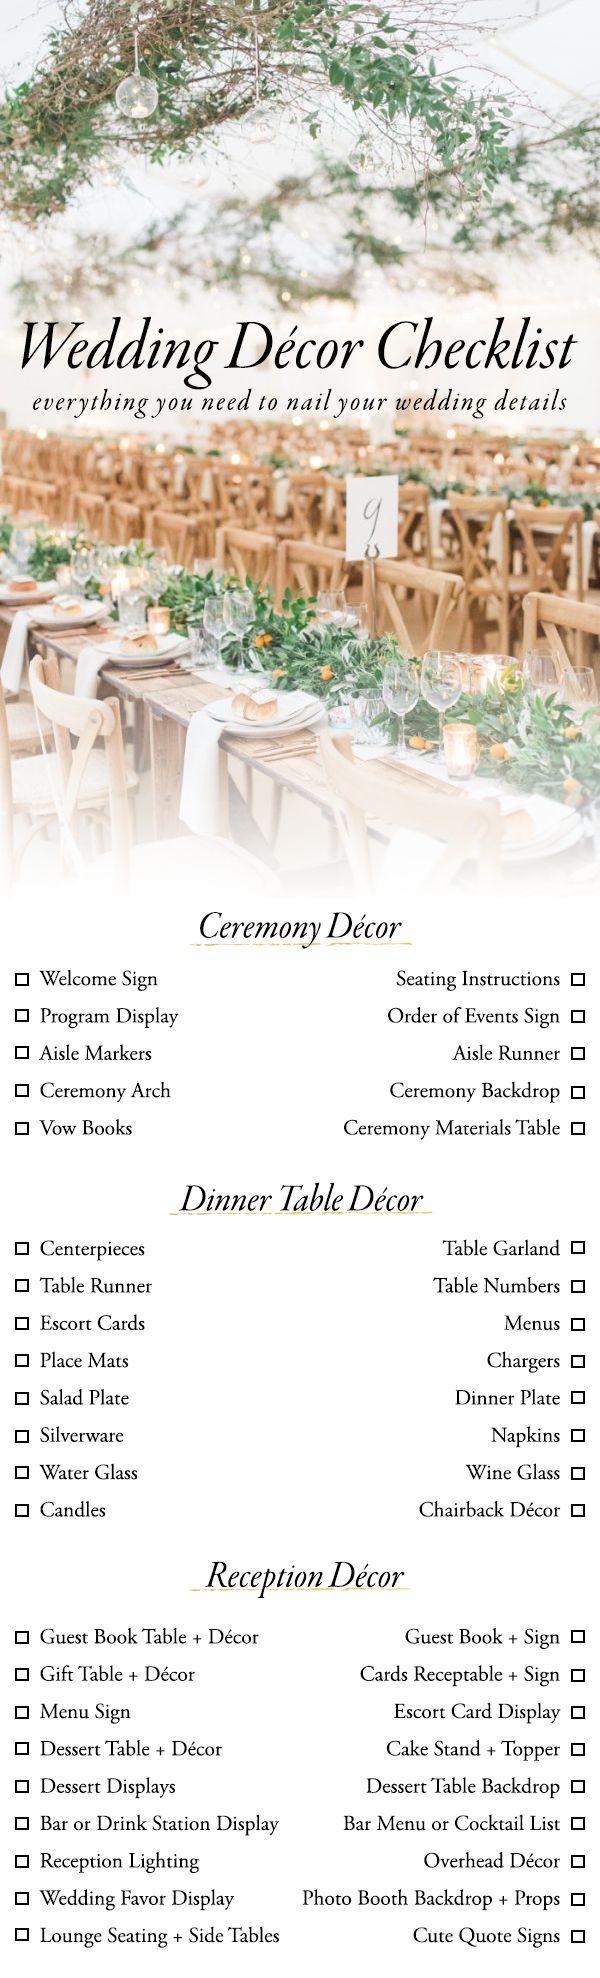 Hochzeit - Use This Wedding Décor Checklist To Help You Nail Every Detail